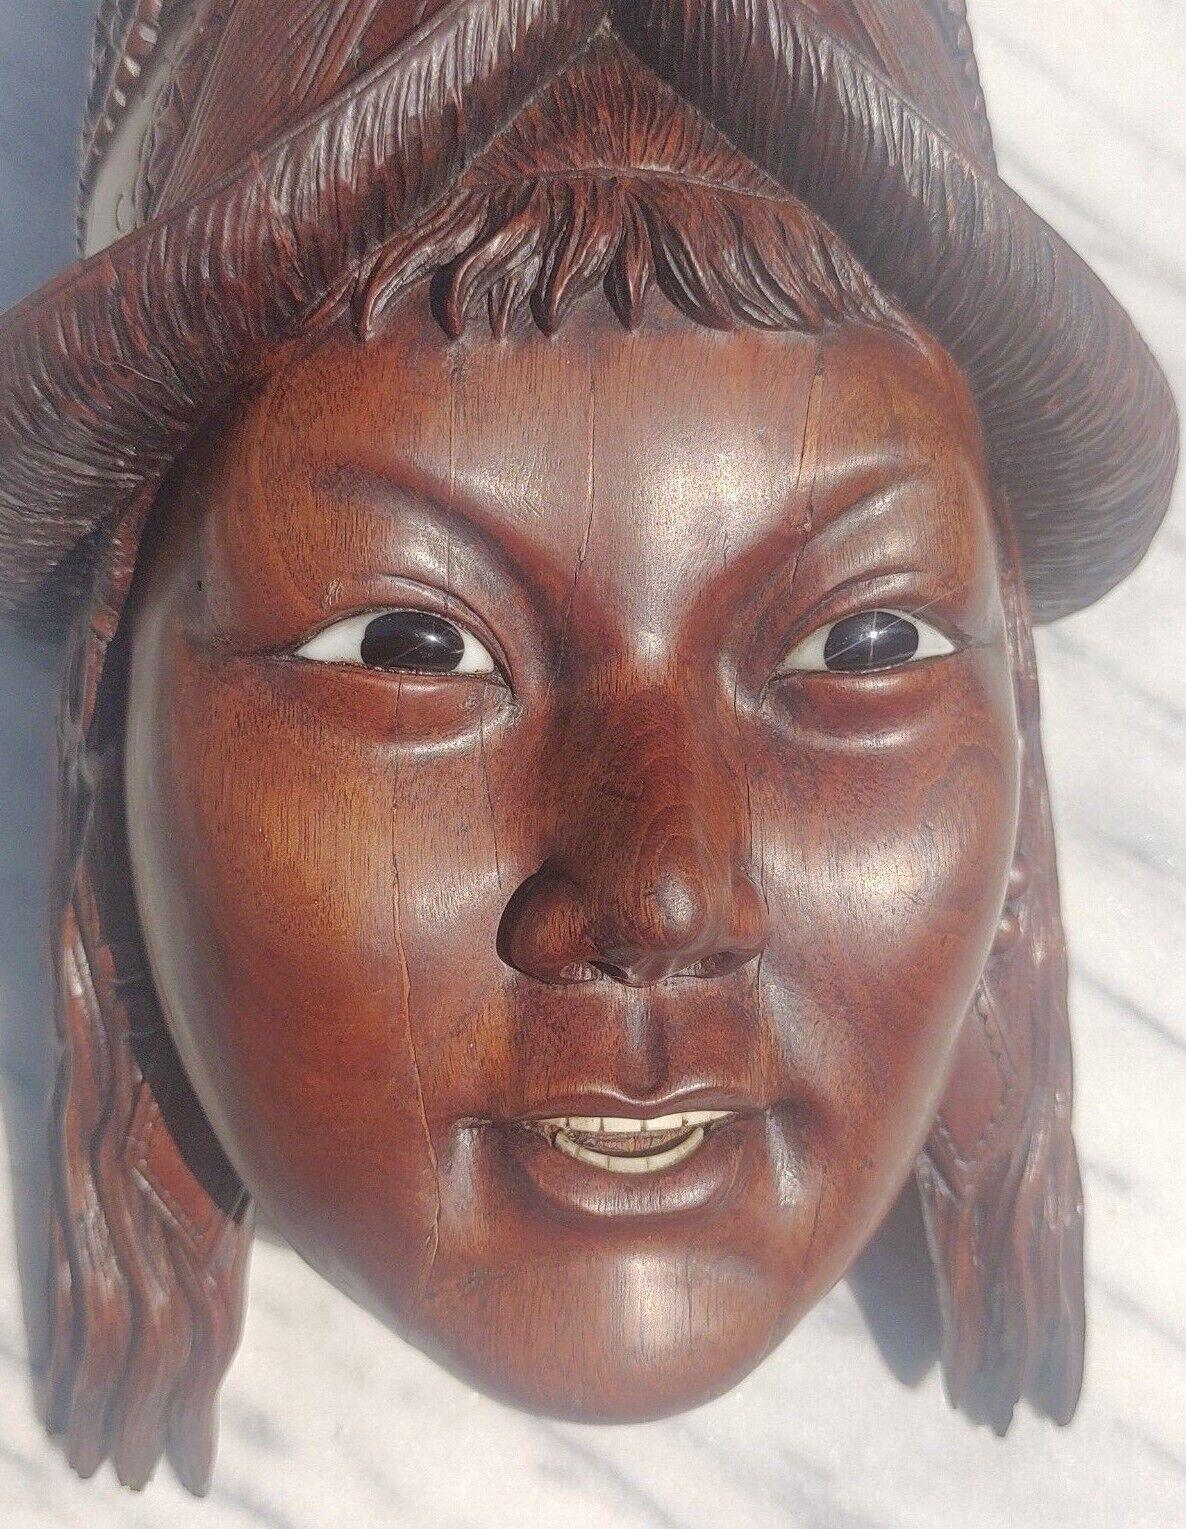 Antique Chinese Hand Carved Rosewood Inlaid Woman Empress Face Mask Sculpture - Tommy's Treasure